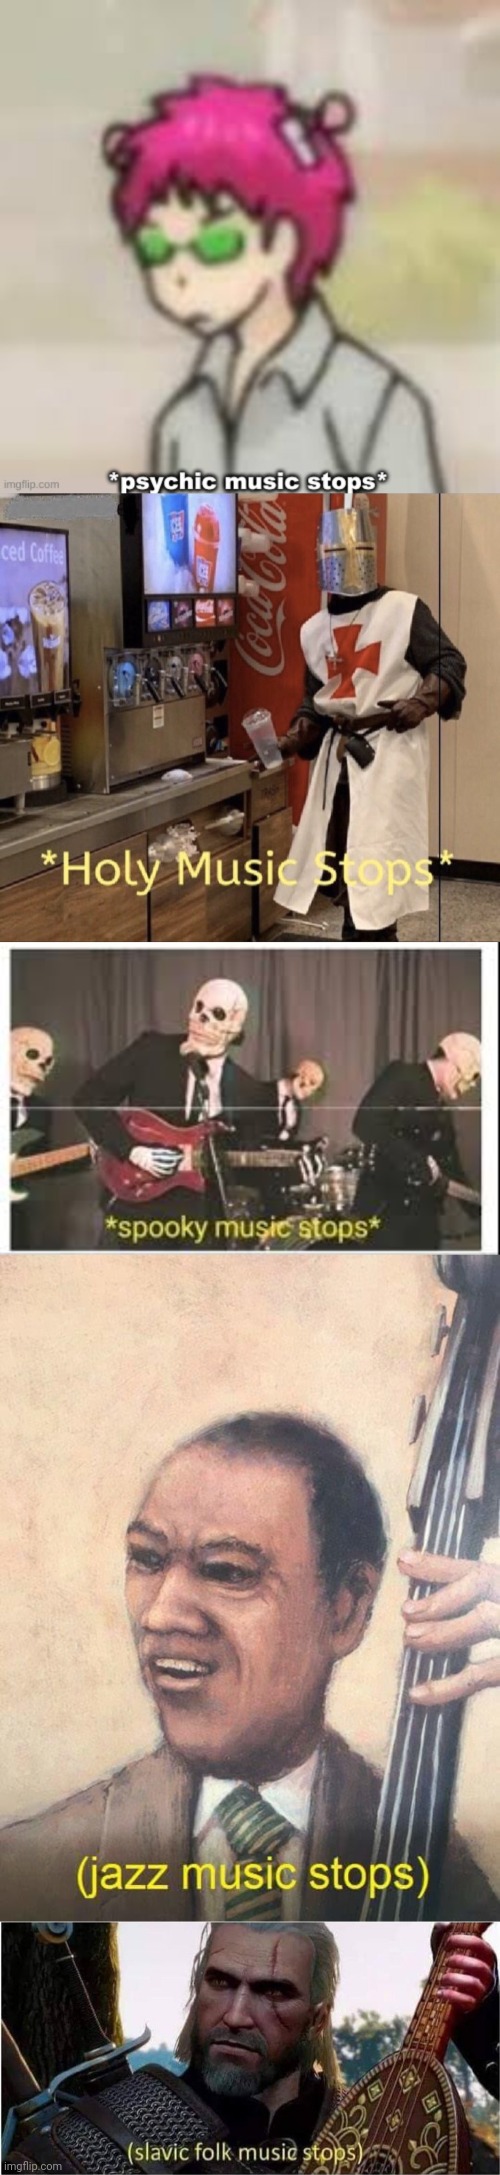 all ze music stops | image tagged in psychic music stops,holy music stops,spooky music stops,jazz music stops,slavic folk music stops | made w/ Imgflip meme maker